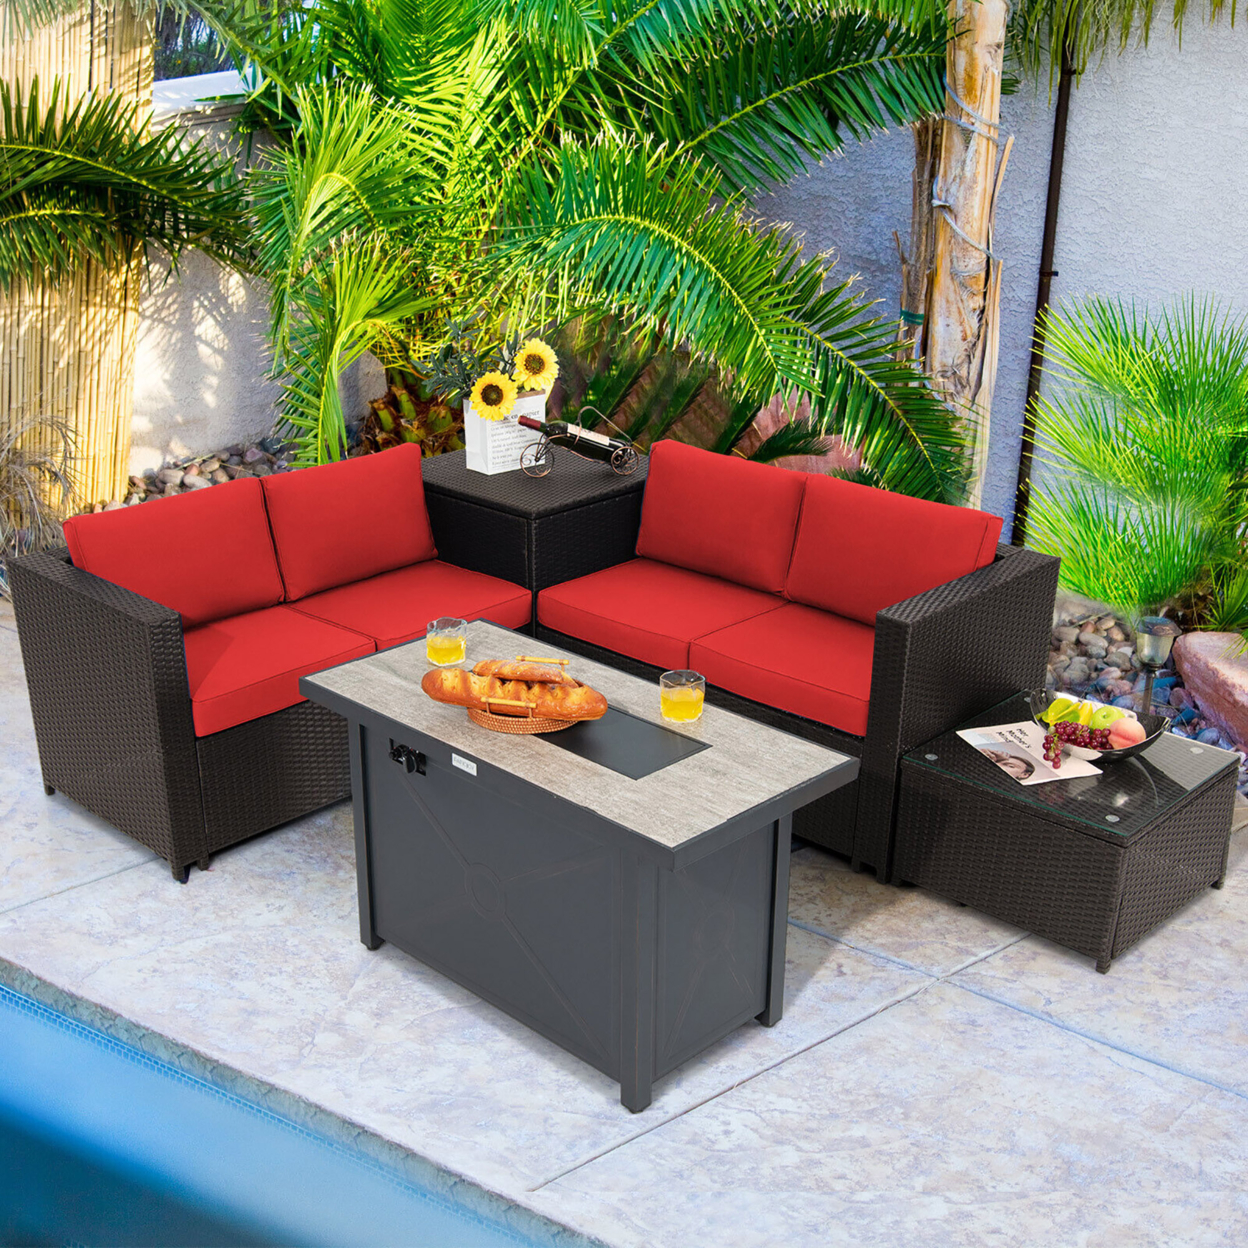 5PCS Patio Rattan Furniture Set Fire Pit Table W/ Cover Storage Cushion - Red